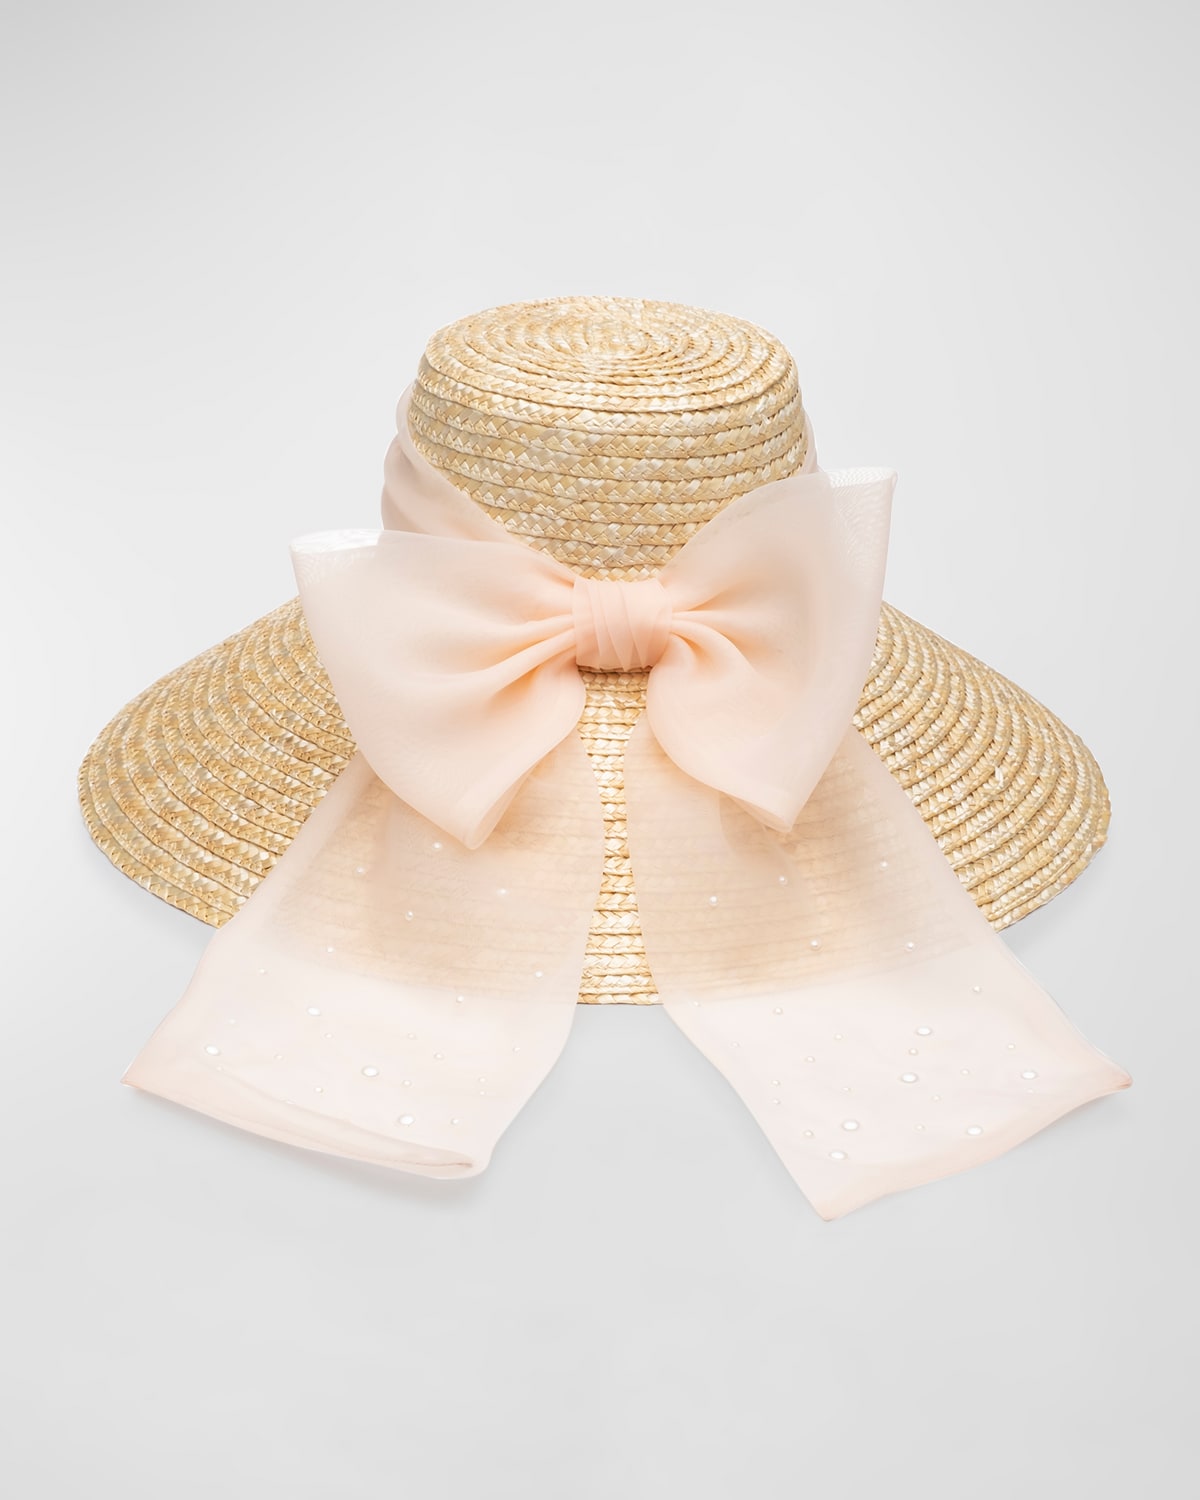 Mirabel Natural Straw Wide-Brim Sun Hat with Bow